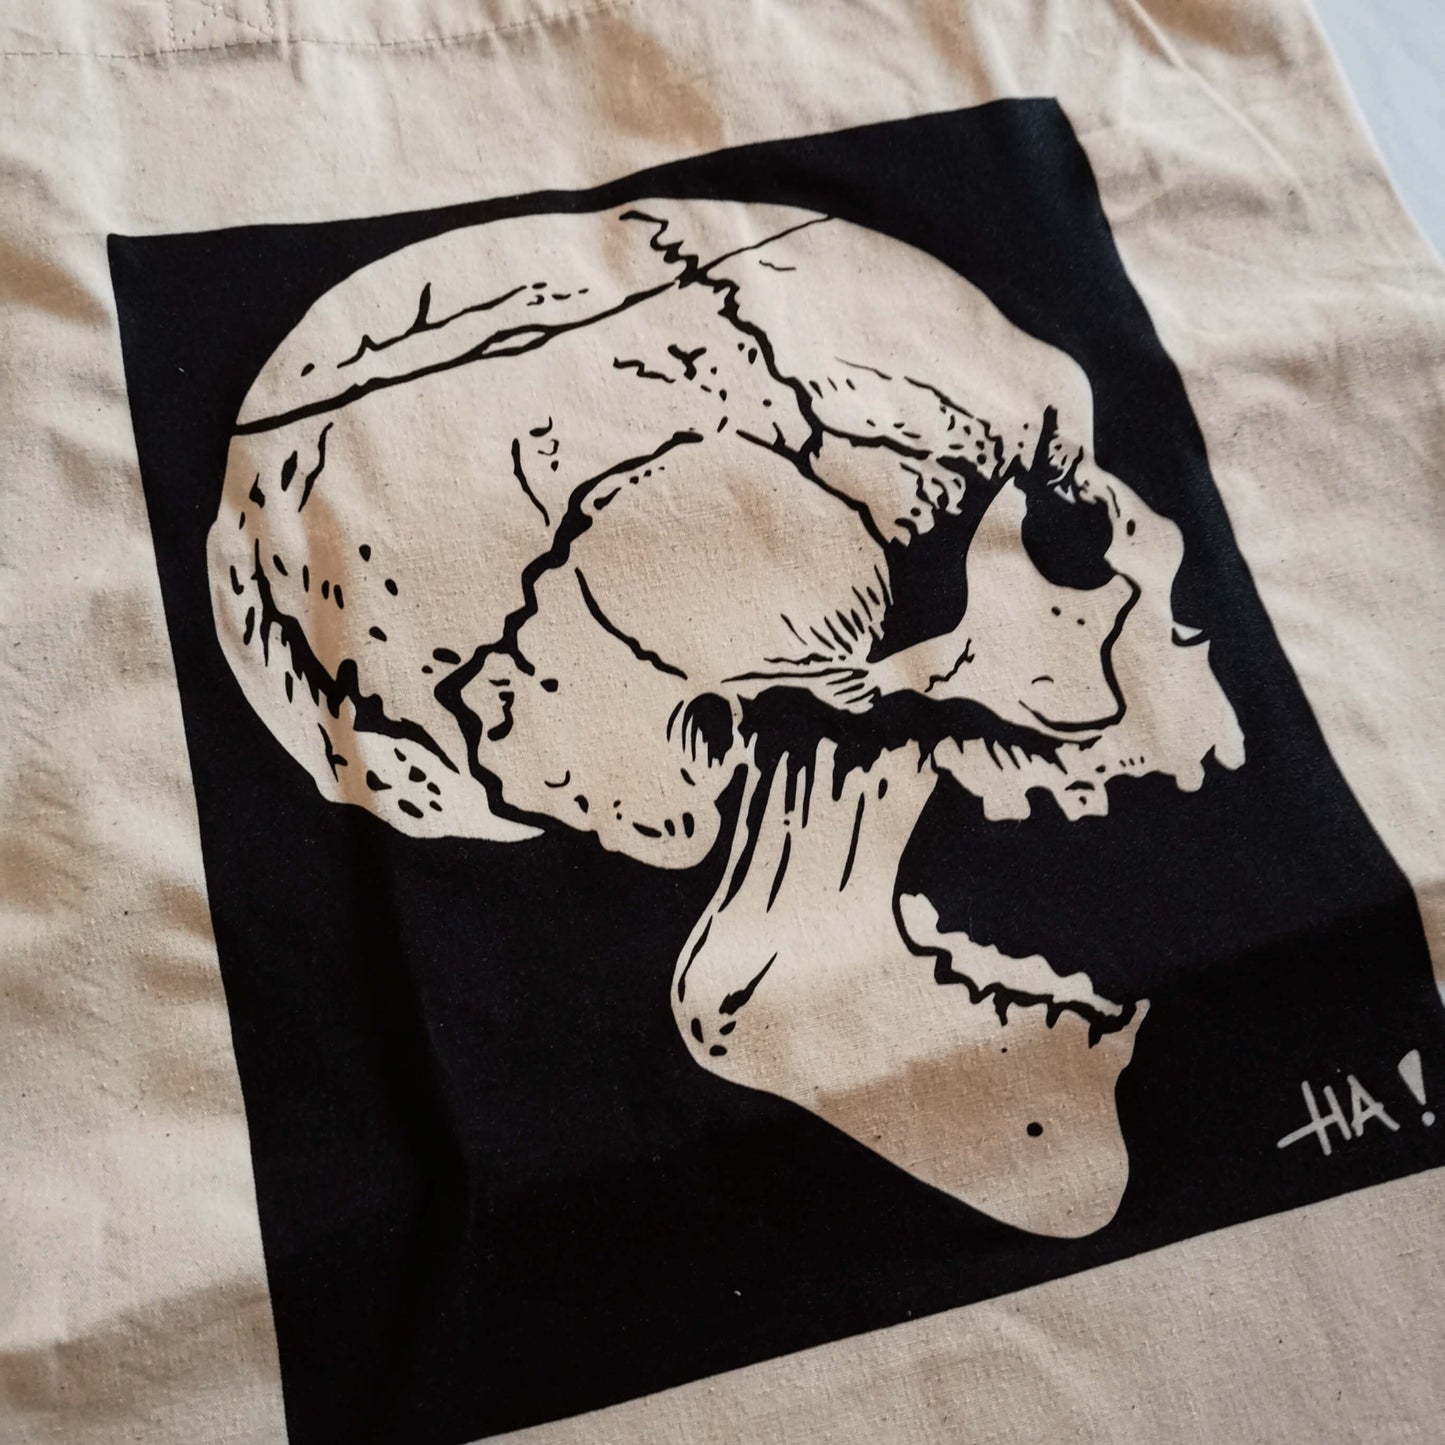 The Laughing Skull on Organic Gothic Tote Bag